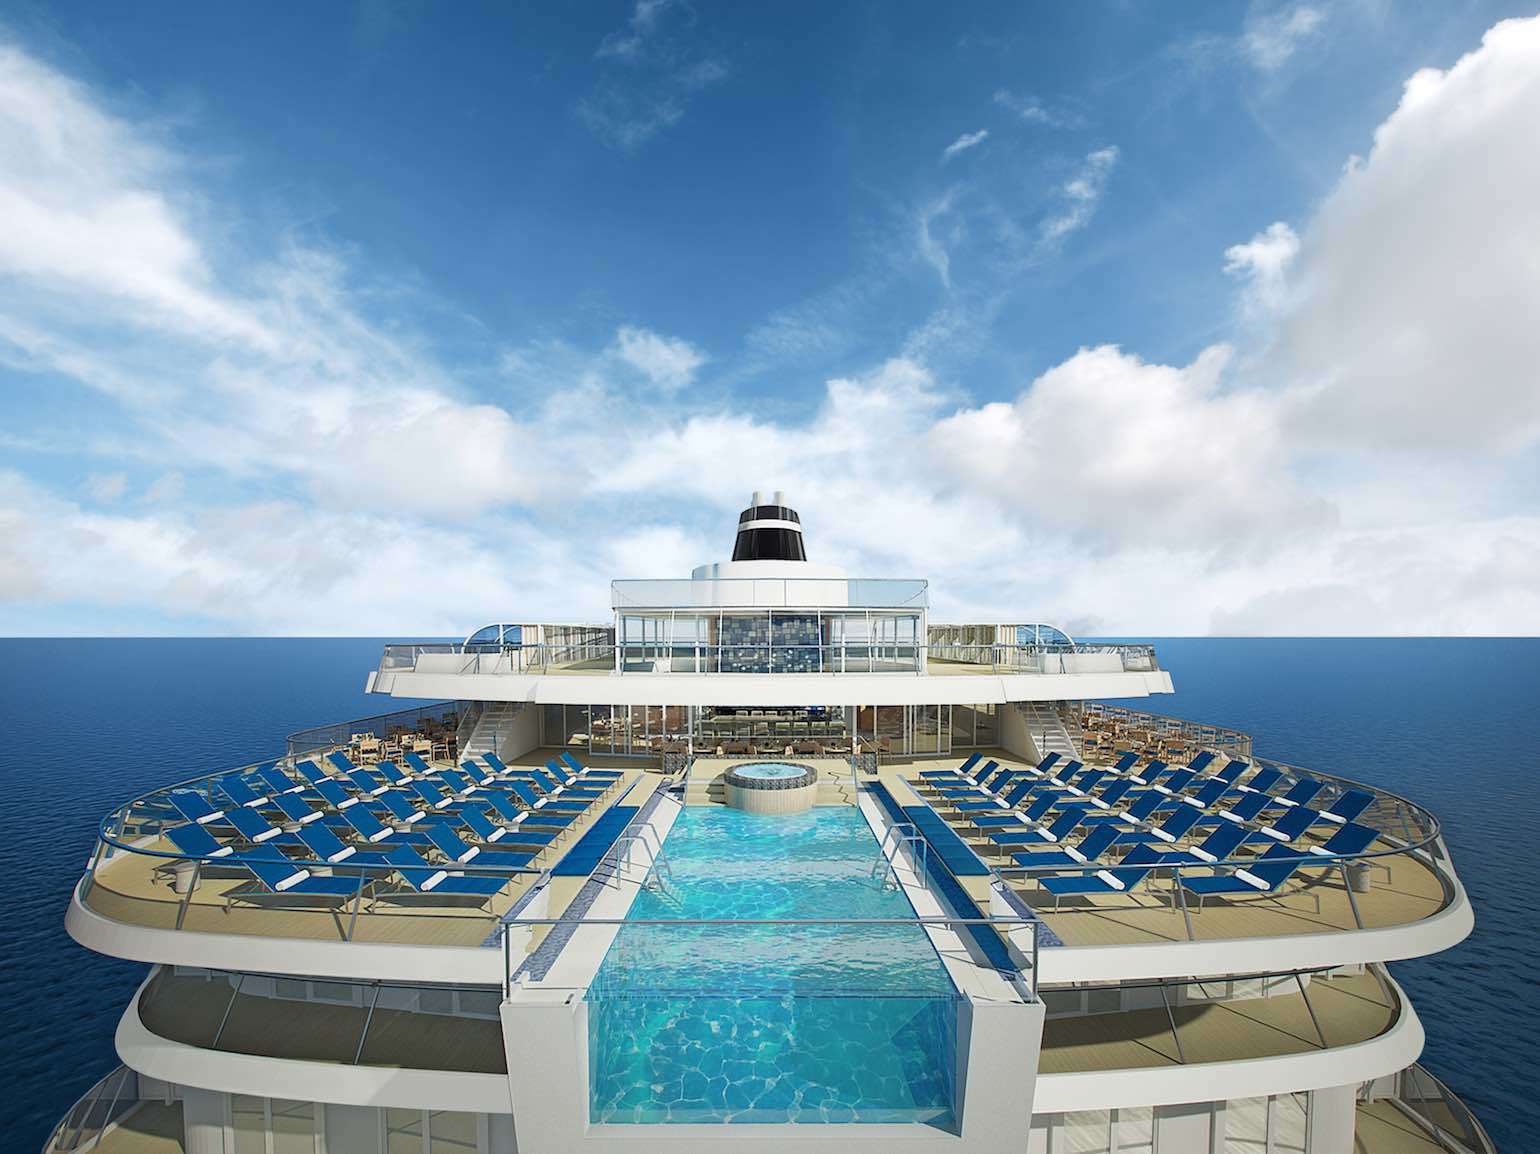 Which Cruise Ships Have The Best And Biggest Pools